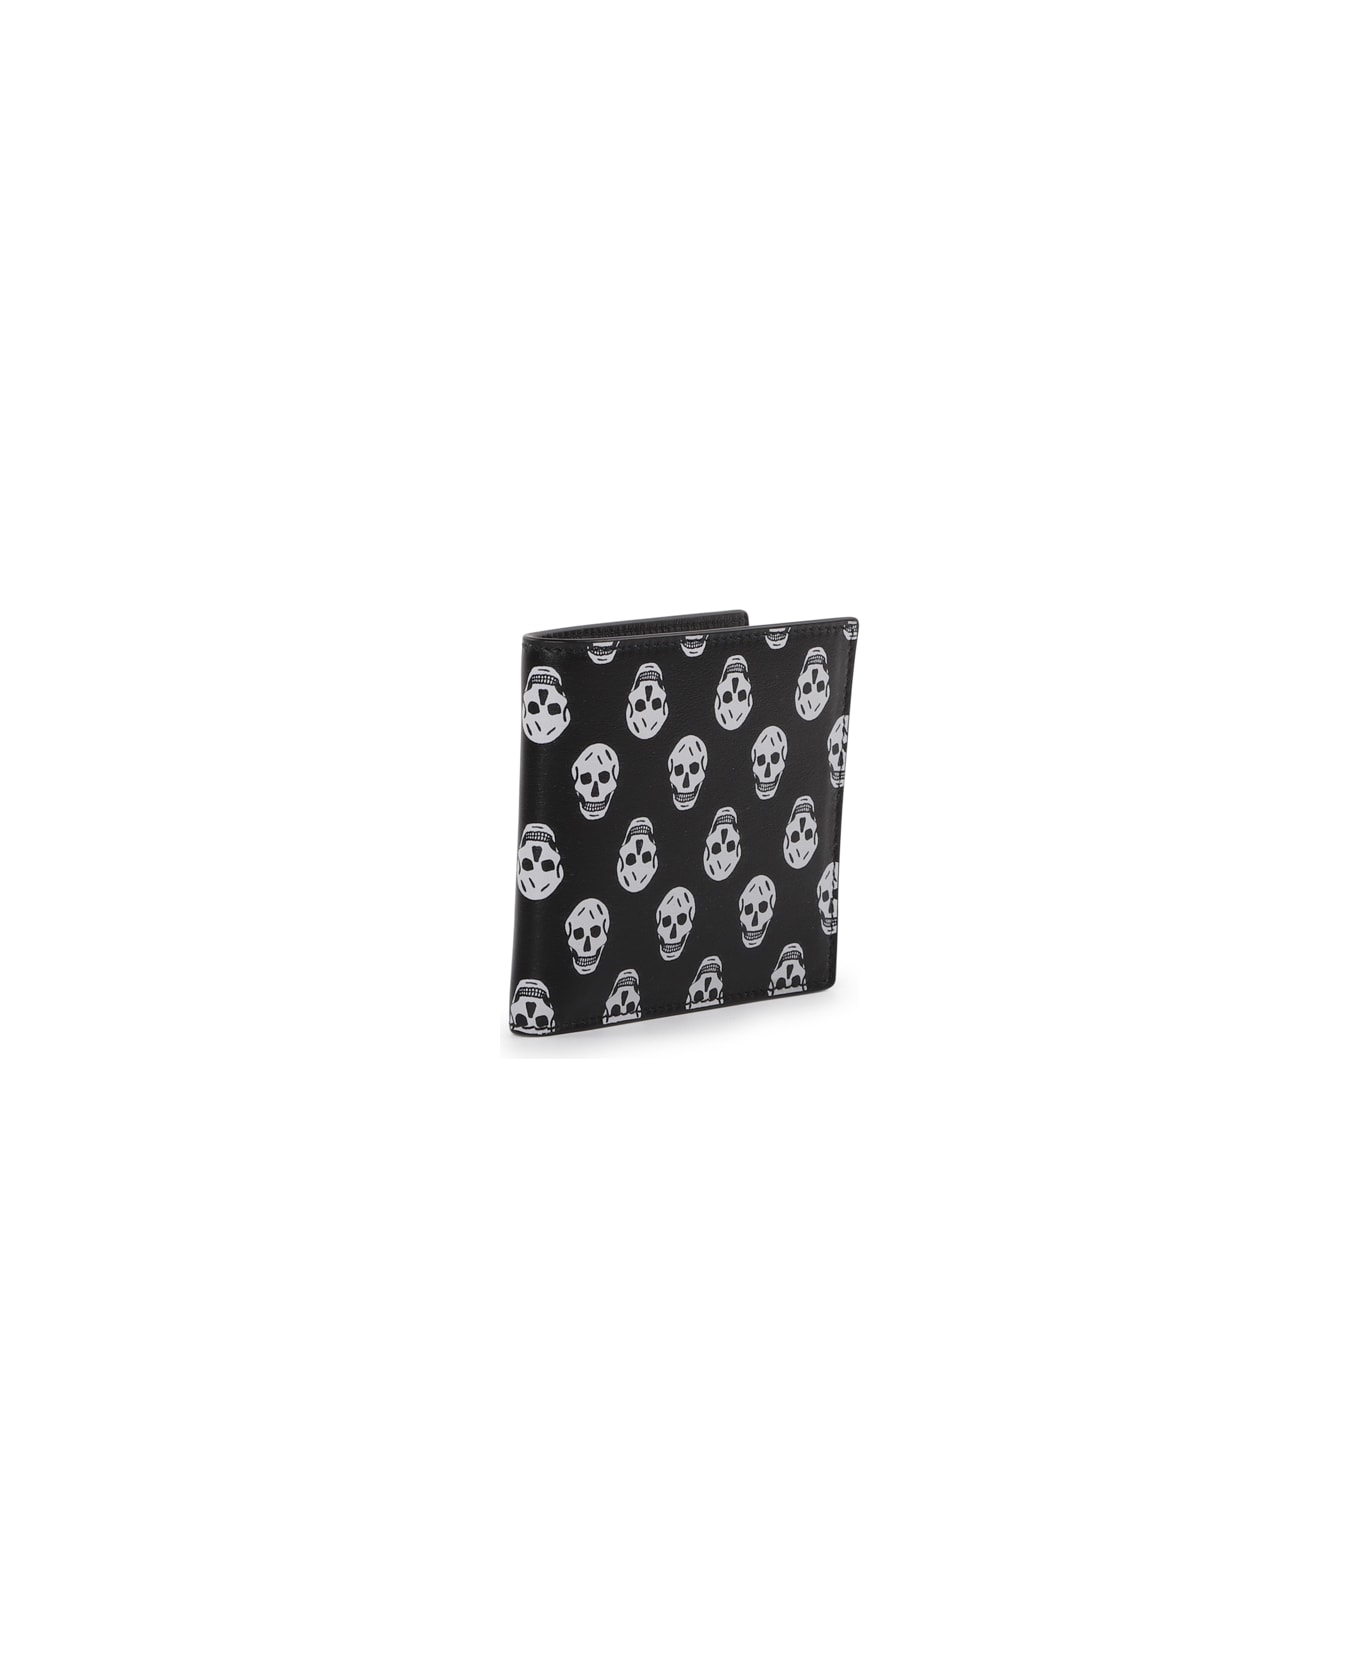 Alexander McQueen Leather Wallet With Skull Print - Black/white 財布